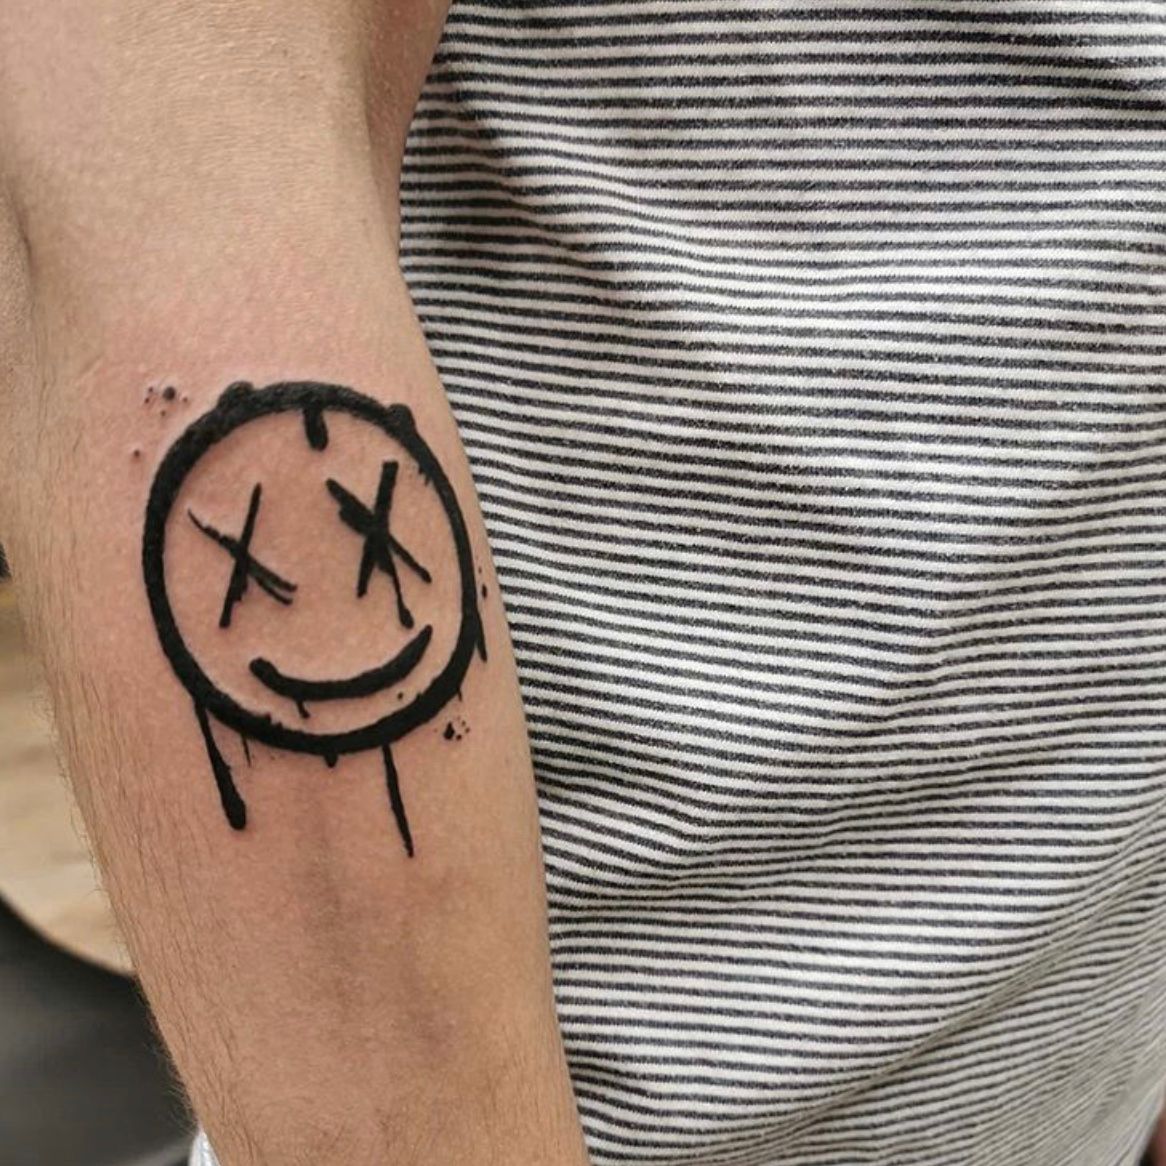 33 Smiley Face Tattoo Ideas Make You Happy Every Day  neartattoos